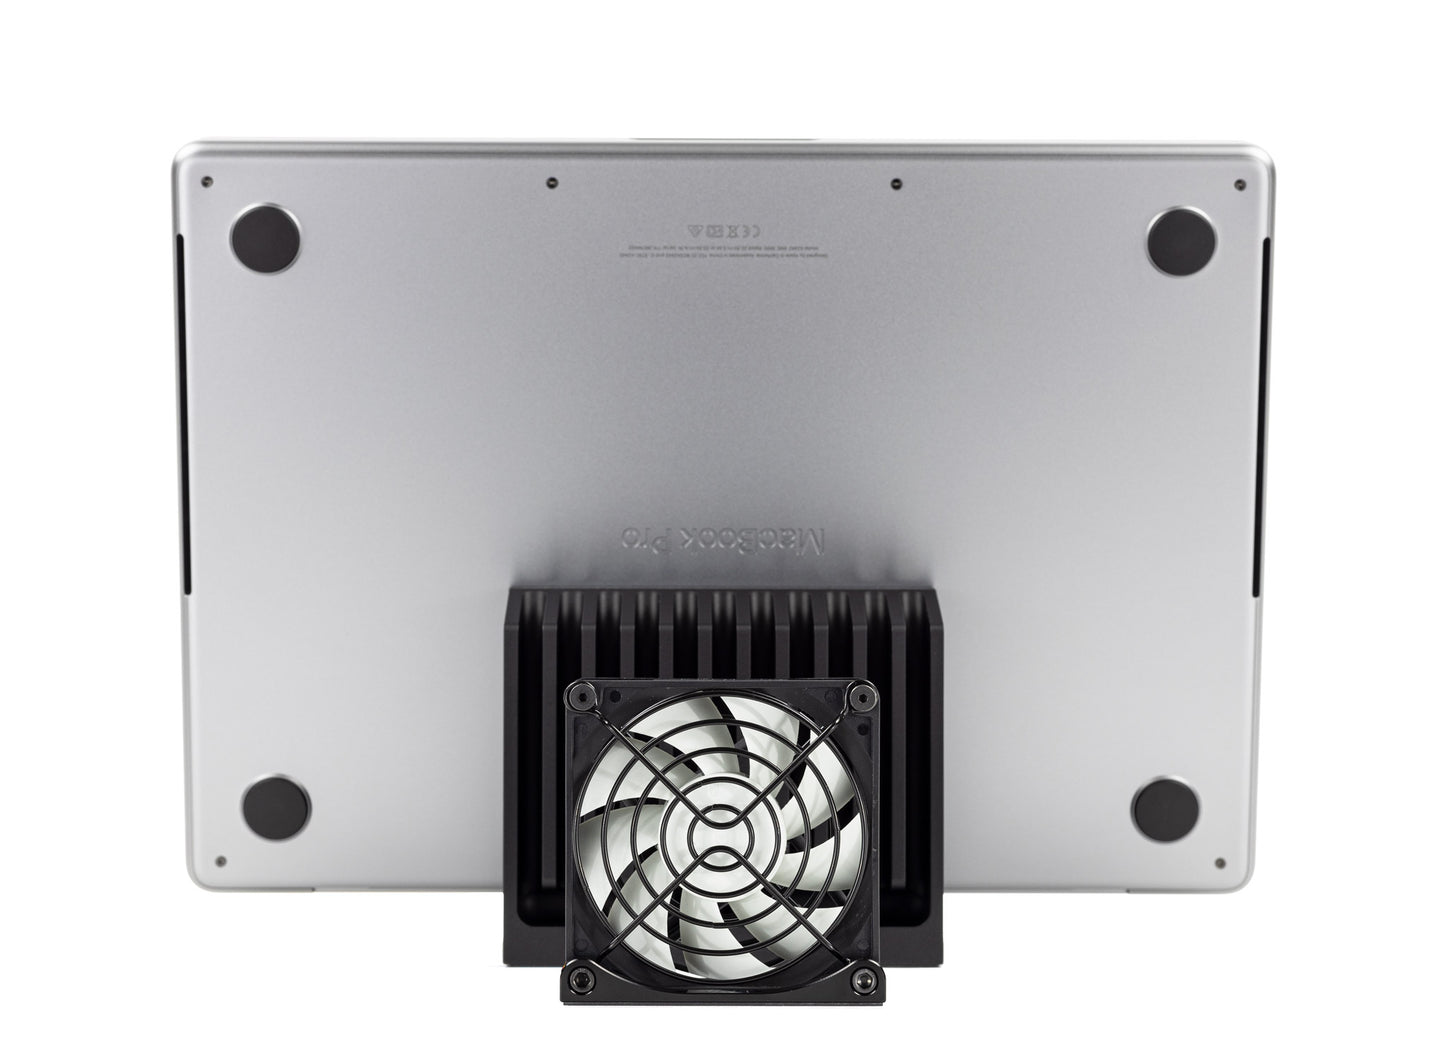 SVALT Cooling Fan model Fx back view for quiet fan and DHCR heatsink cooling performance with Apple laptop MacBook Pro